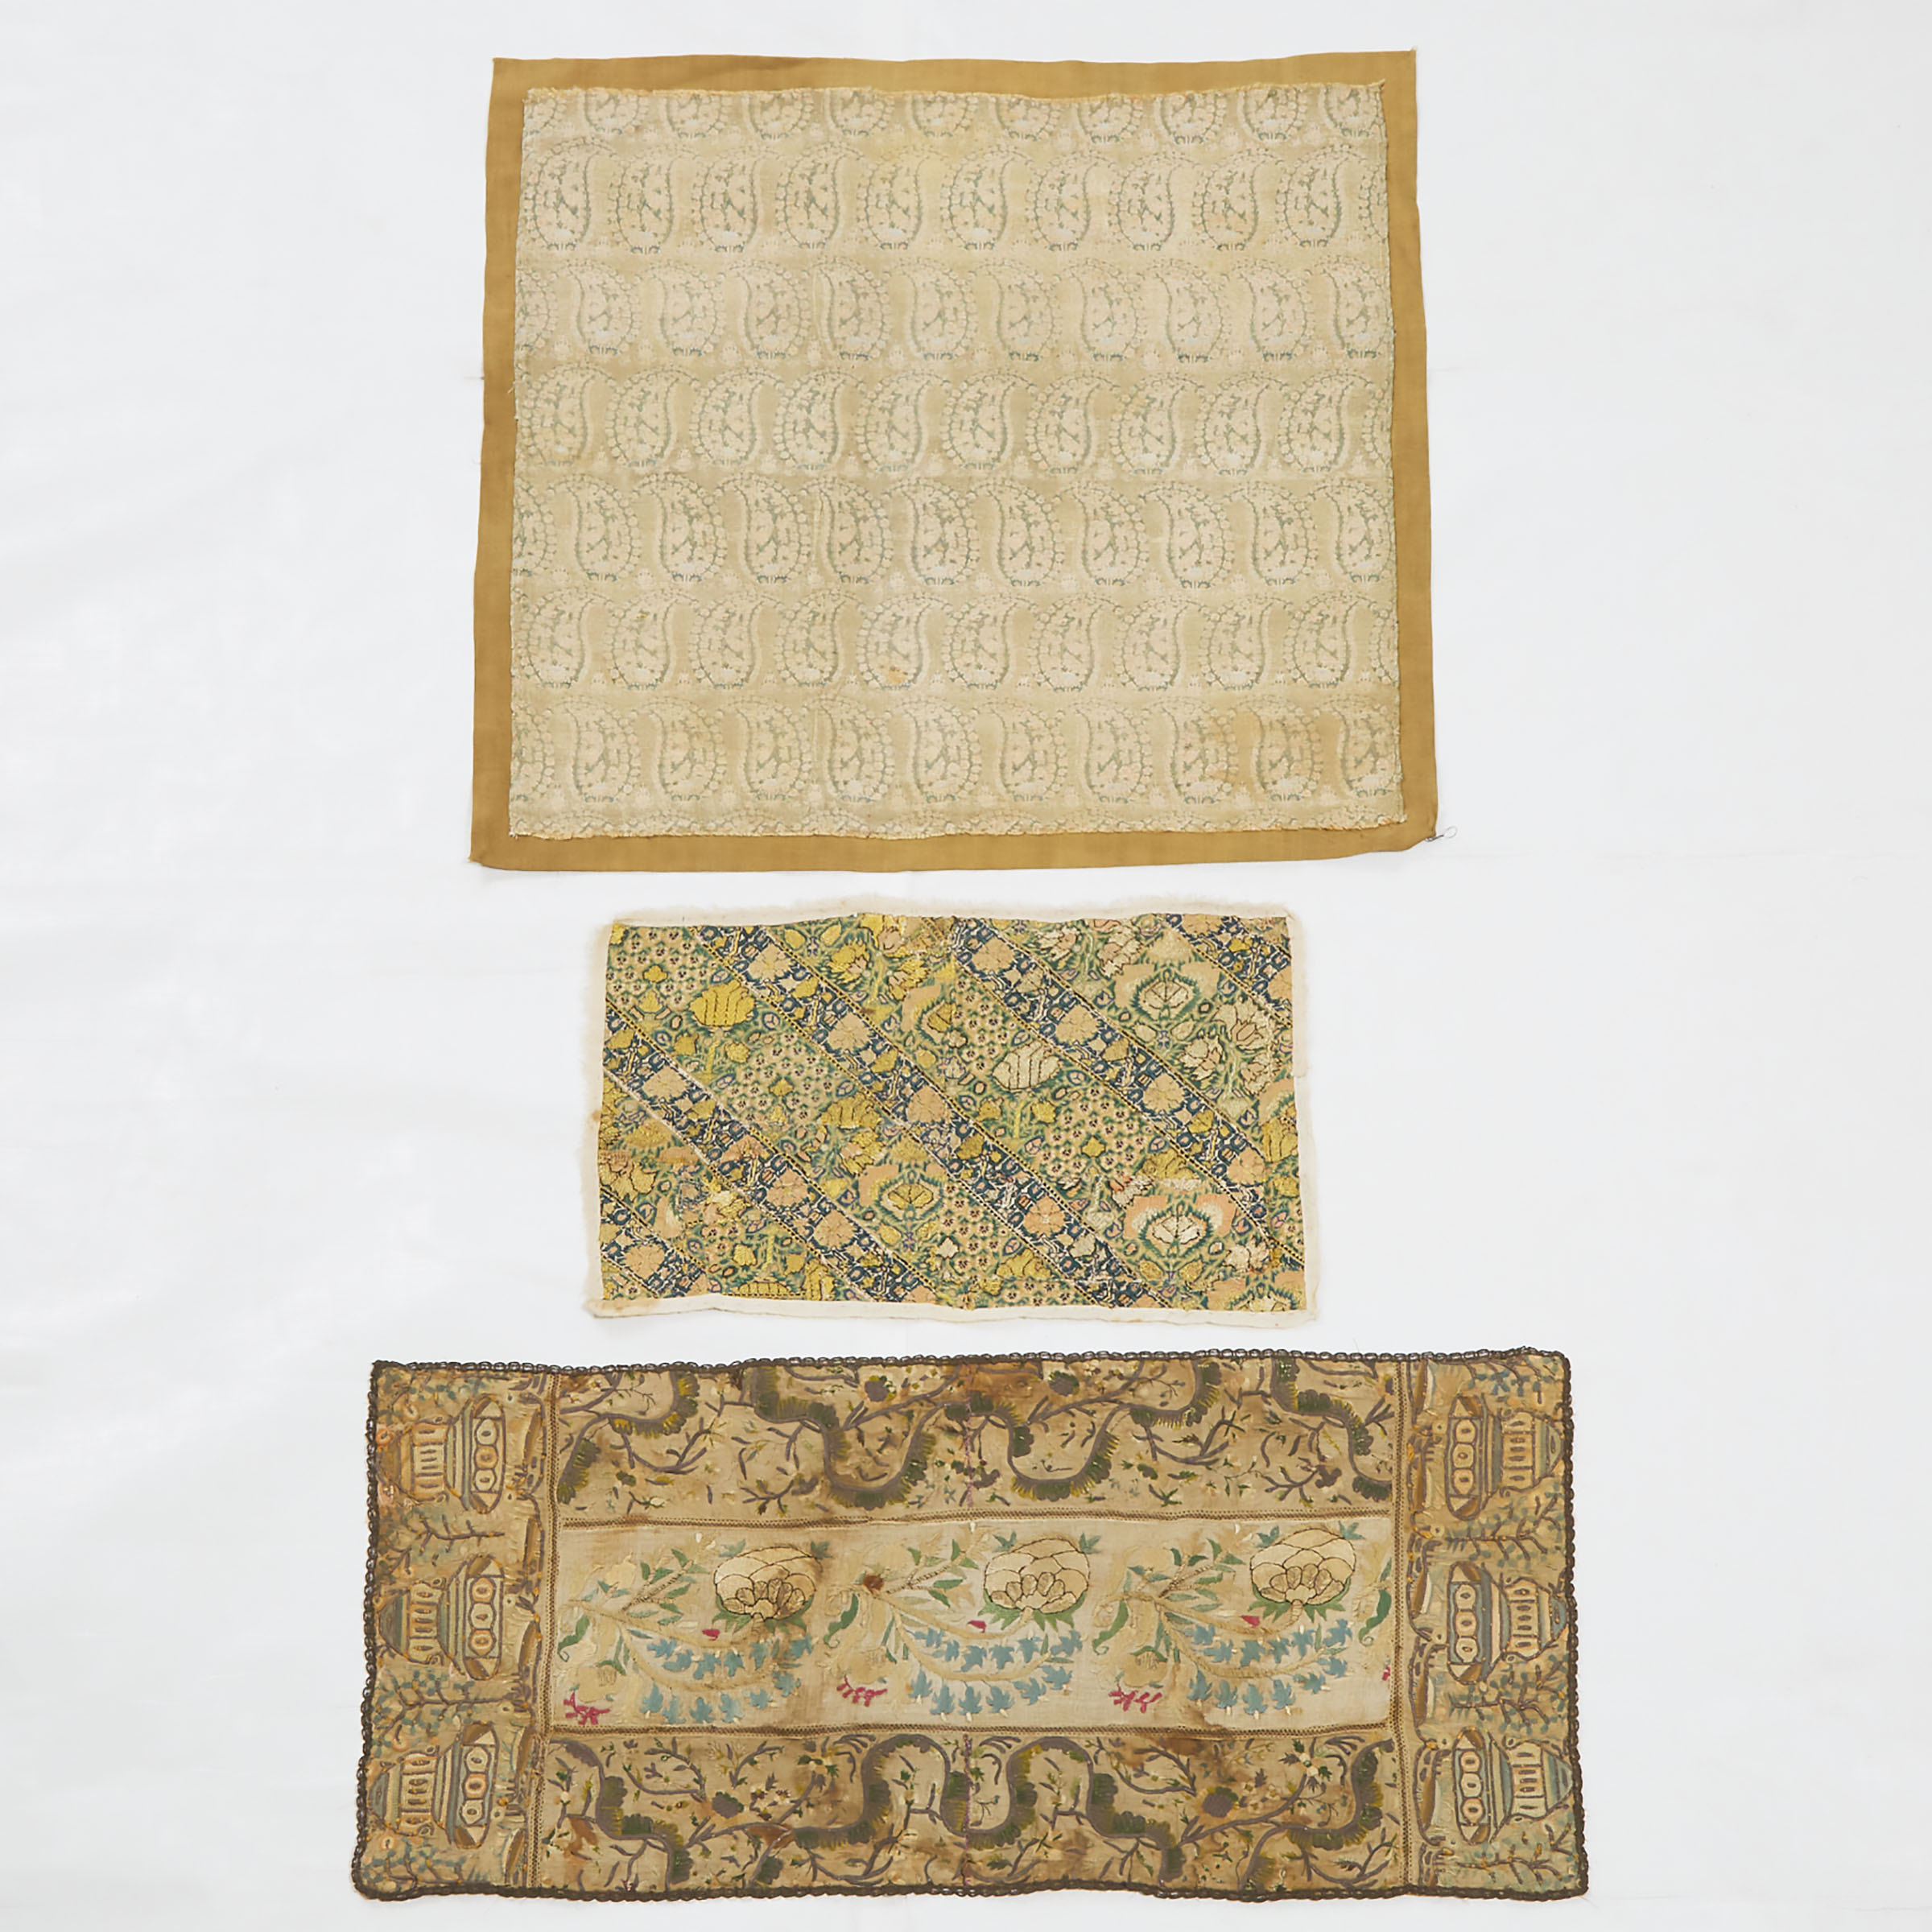 Turkish Ottoman Fragment, c.1800 together with Two Persian Needlepoint Fragments, c.1750/1800